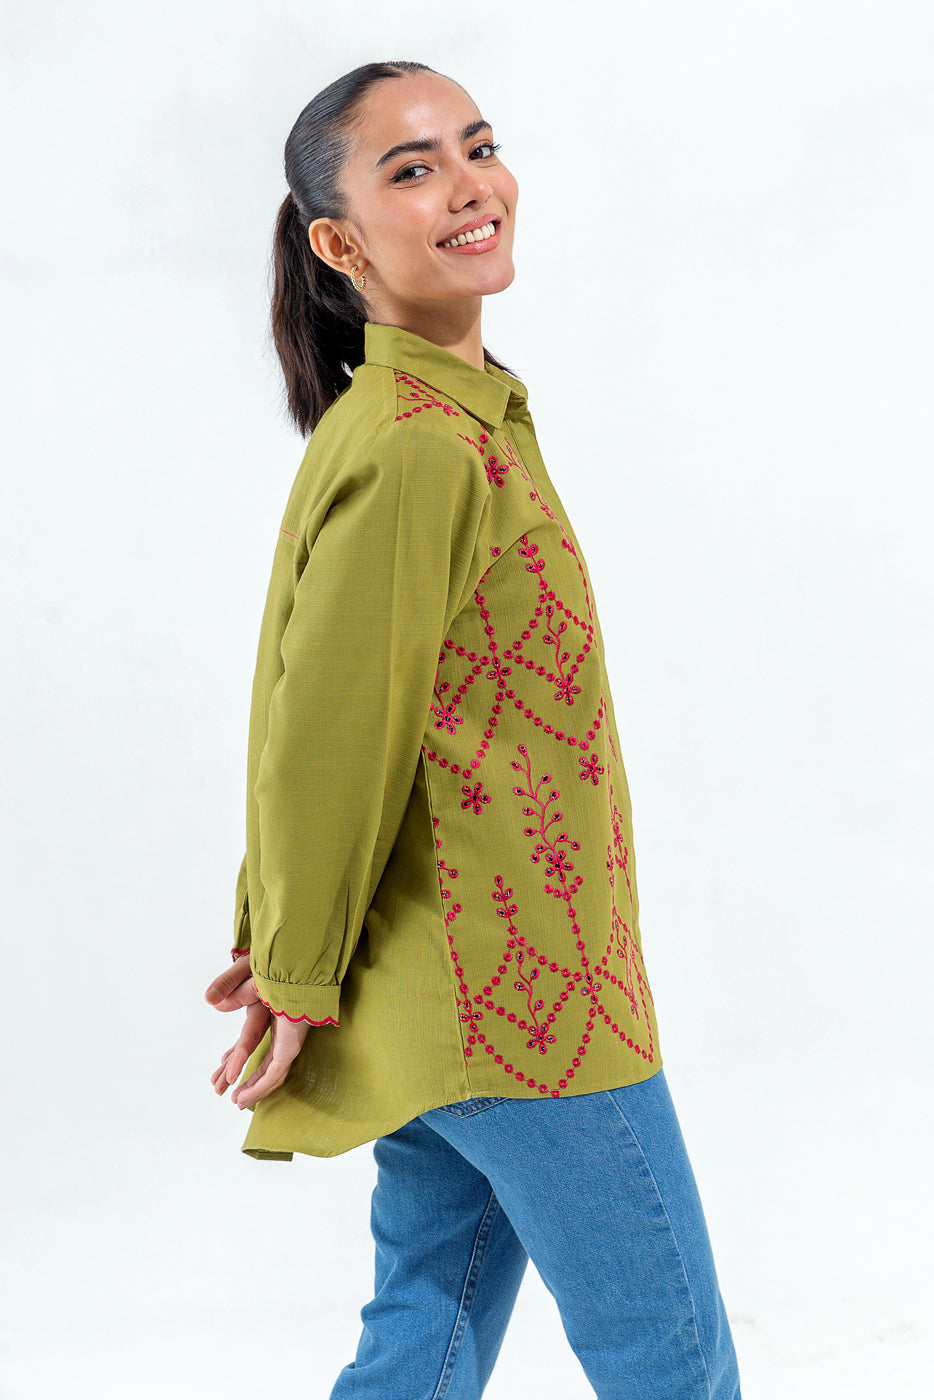 Embroidered Top - BEECHTREE